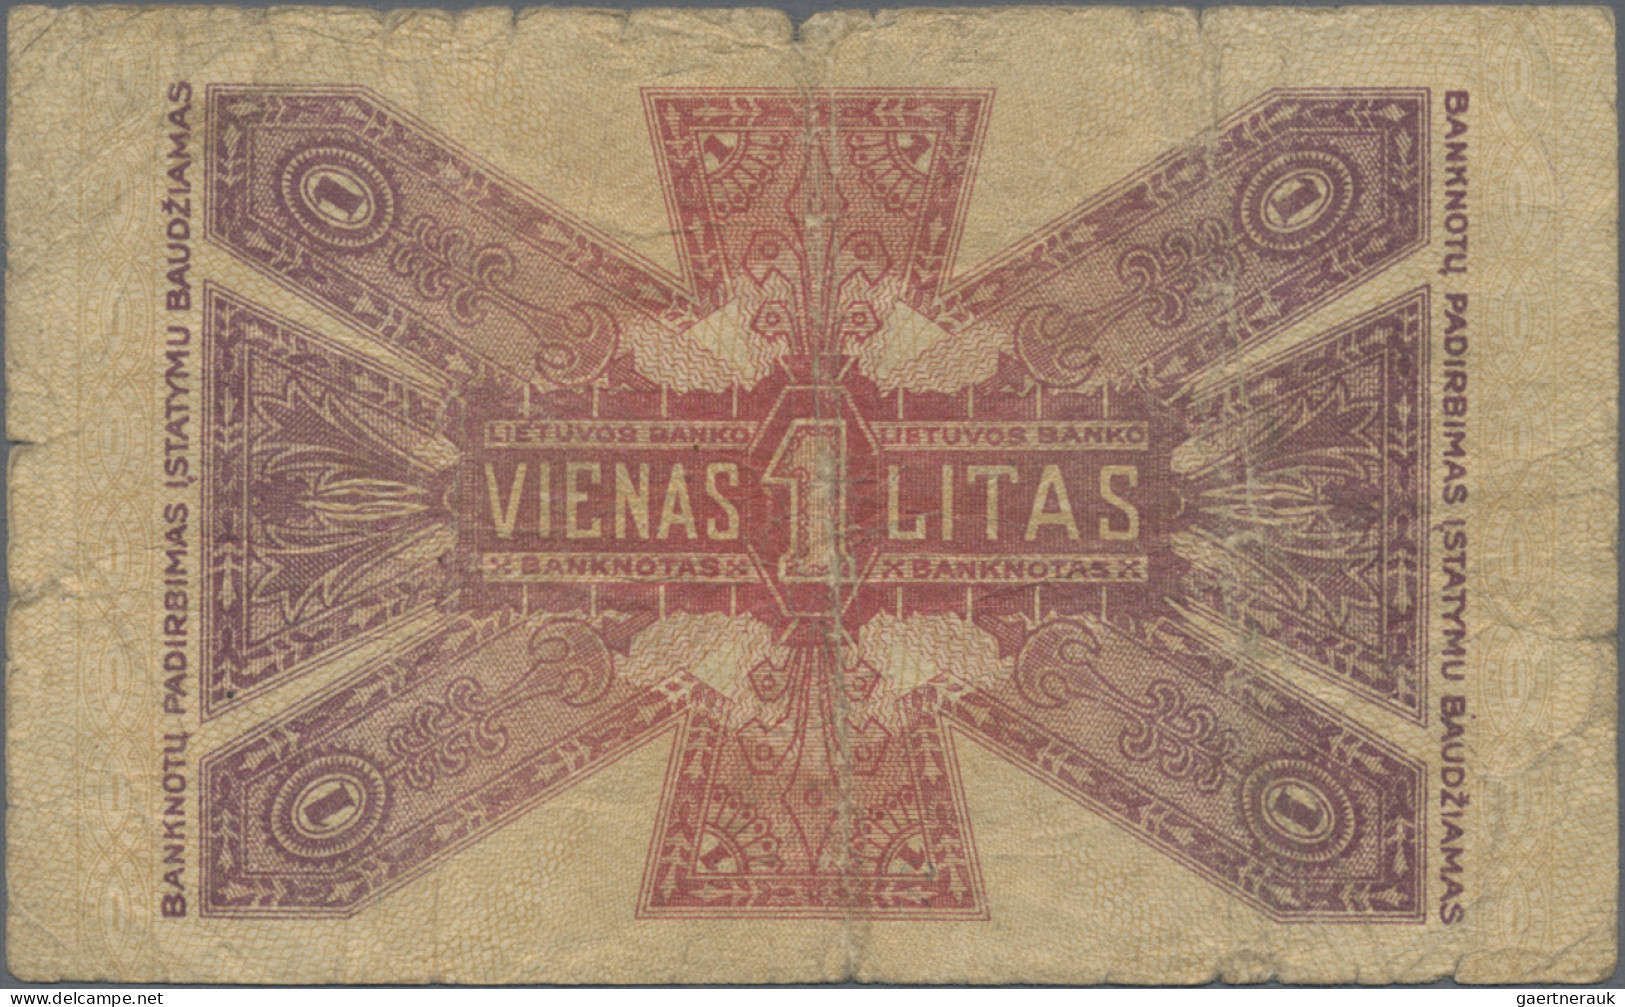 Lithuania: Lietuvos Bankas, Very Nice Set With 5 Banknotes, 1922 Series, With 1 - Lithuania